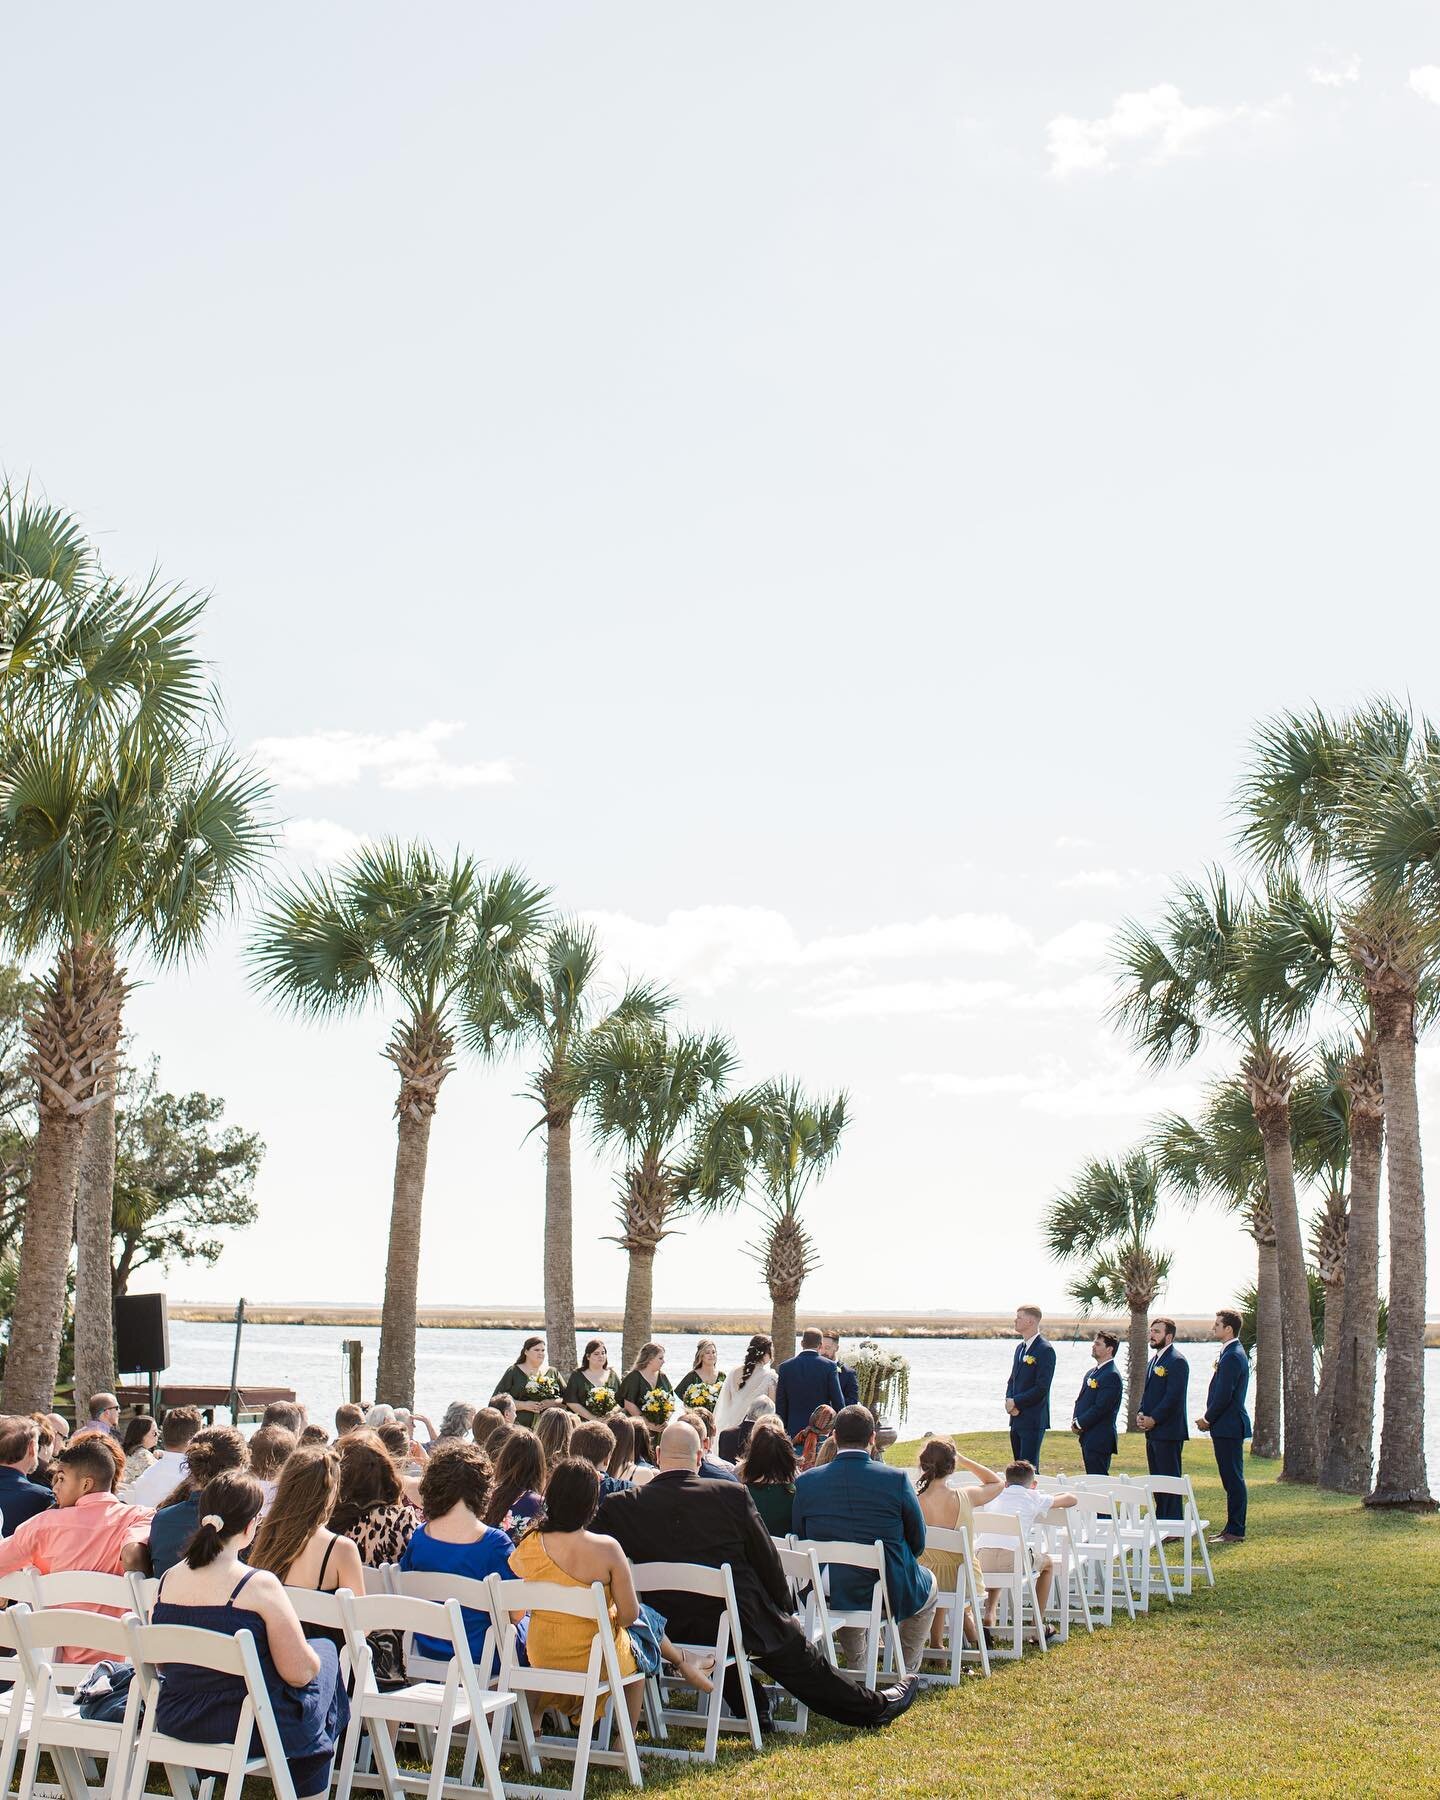 The sunniest fall day for a sweet ceremony on the bay. ☀️